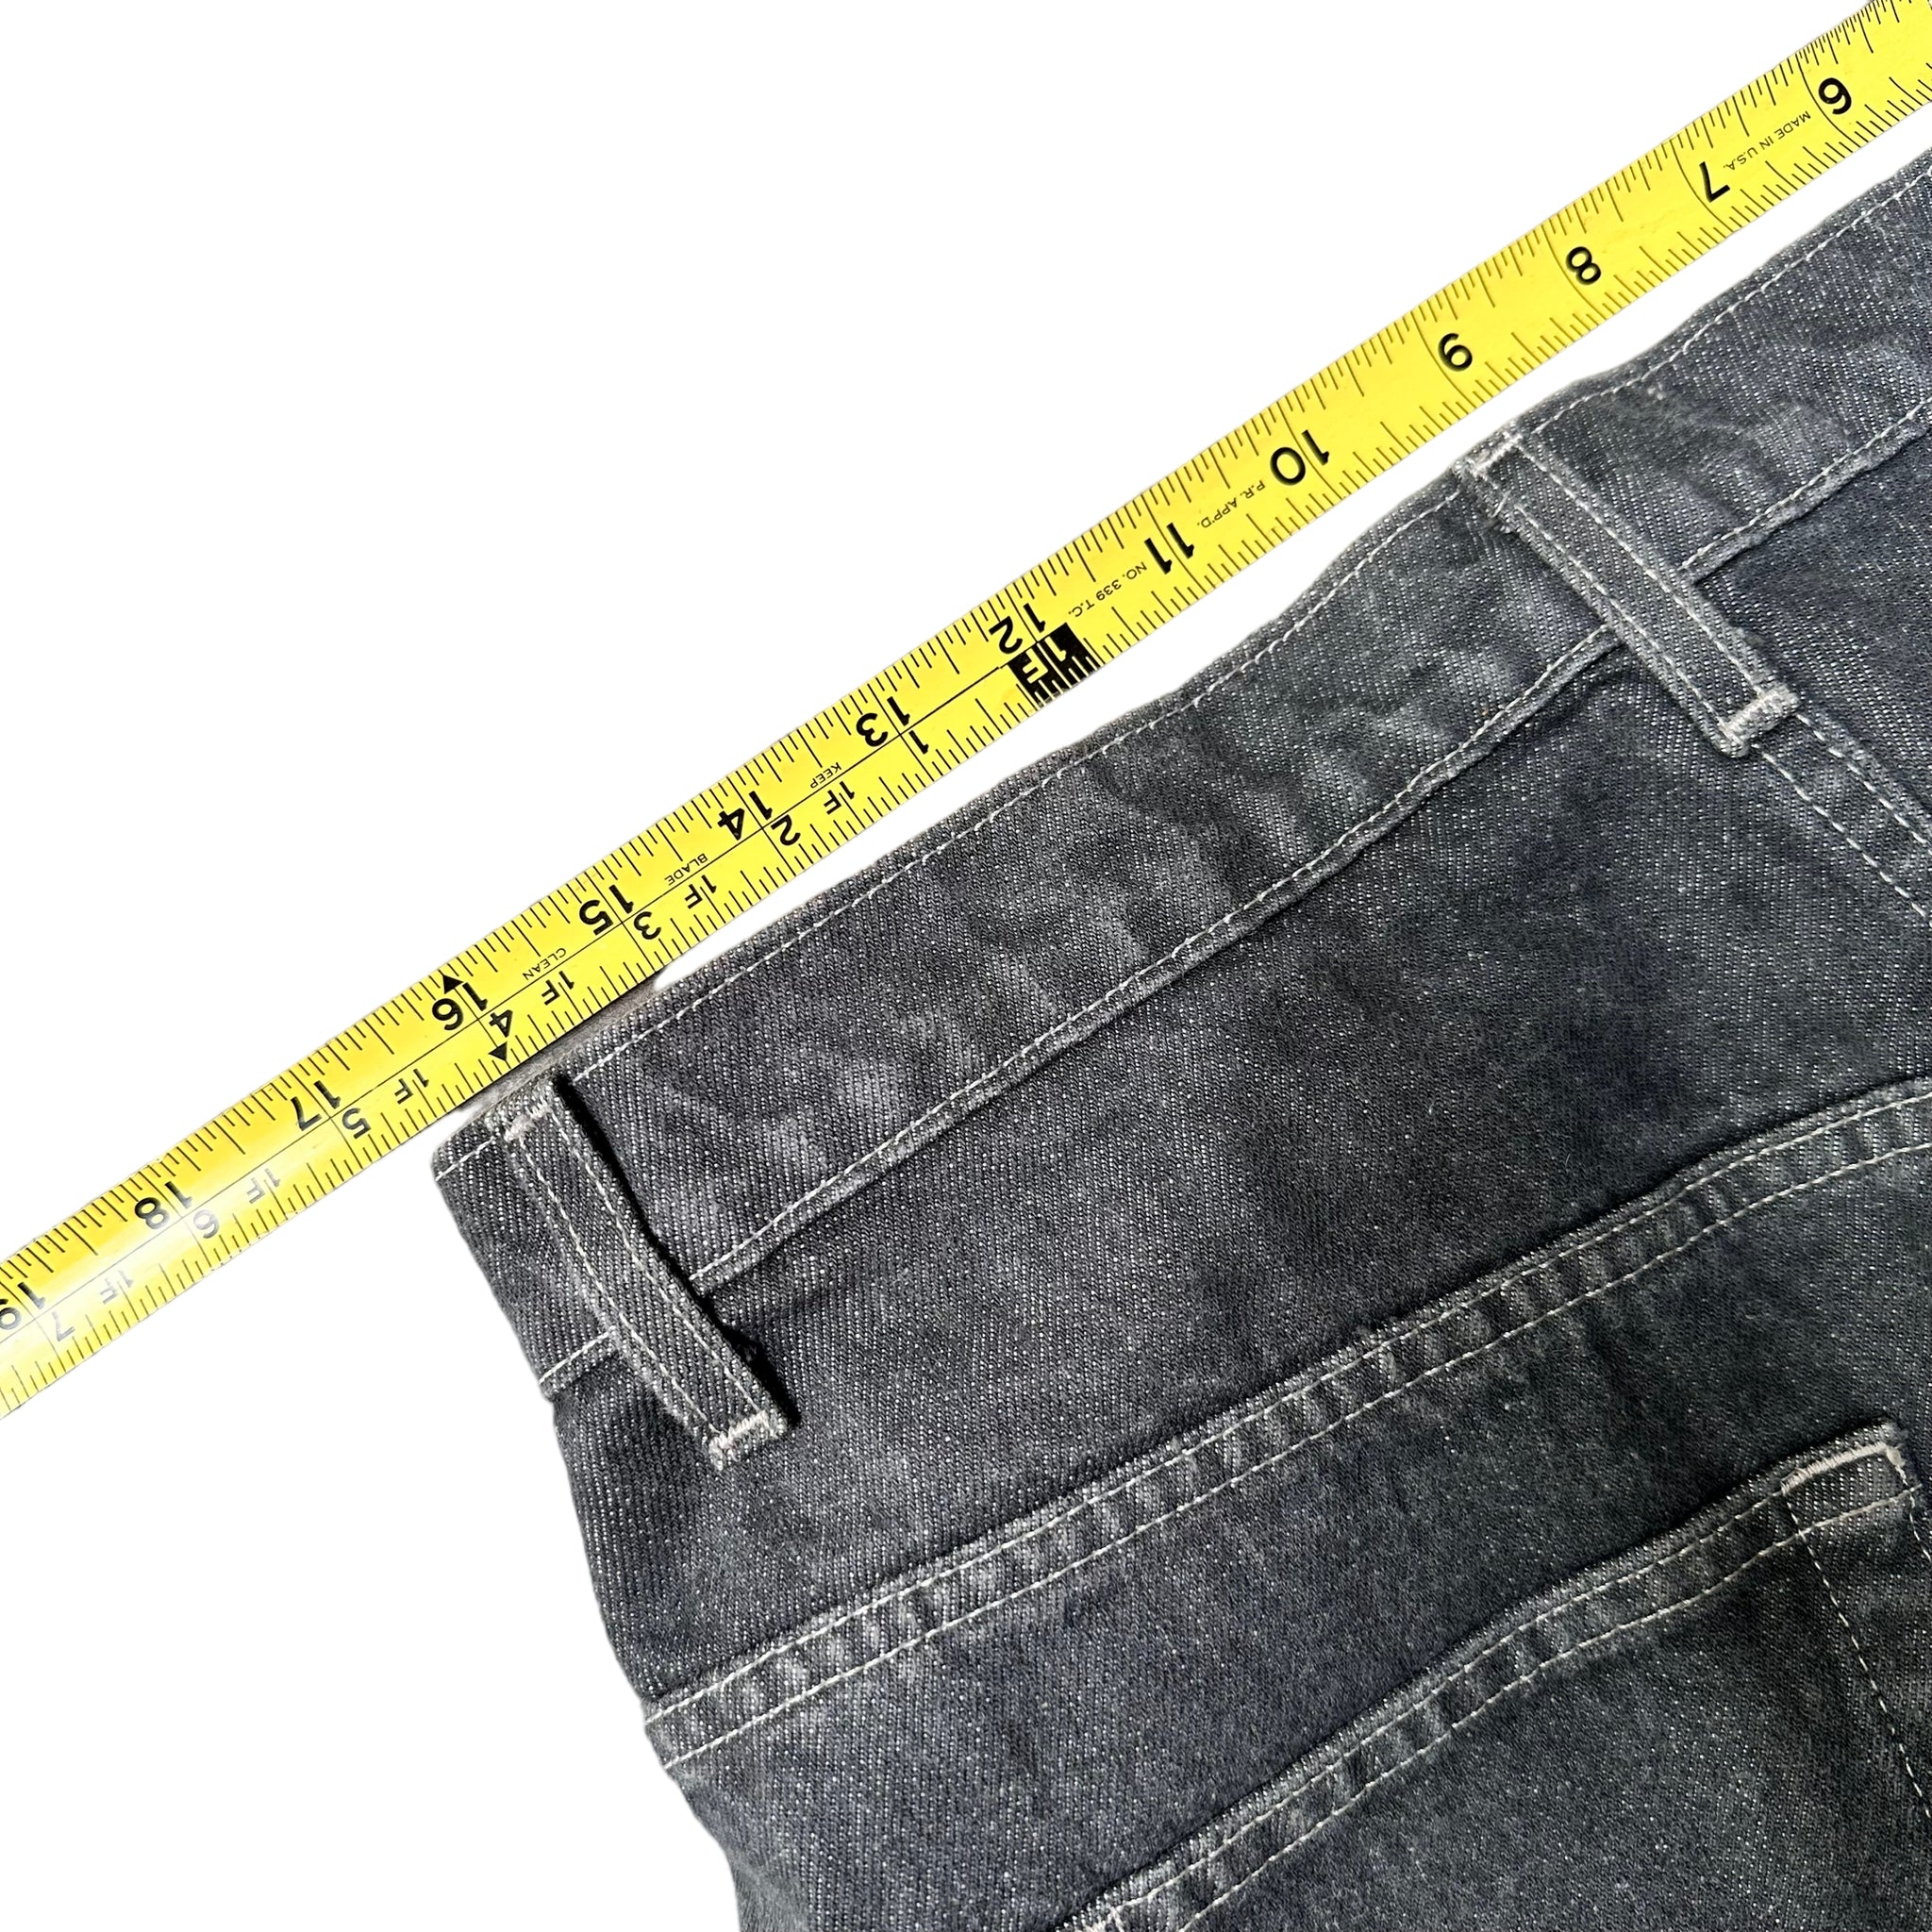 90s High quality baggy carpenter jeans 34/33